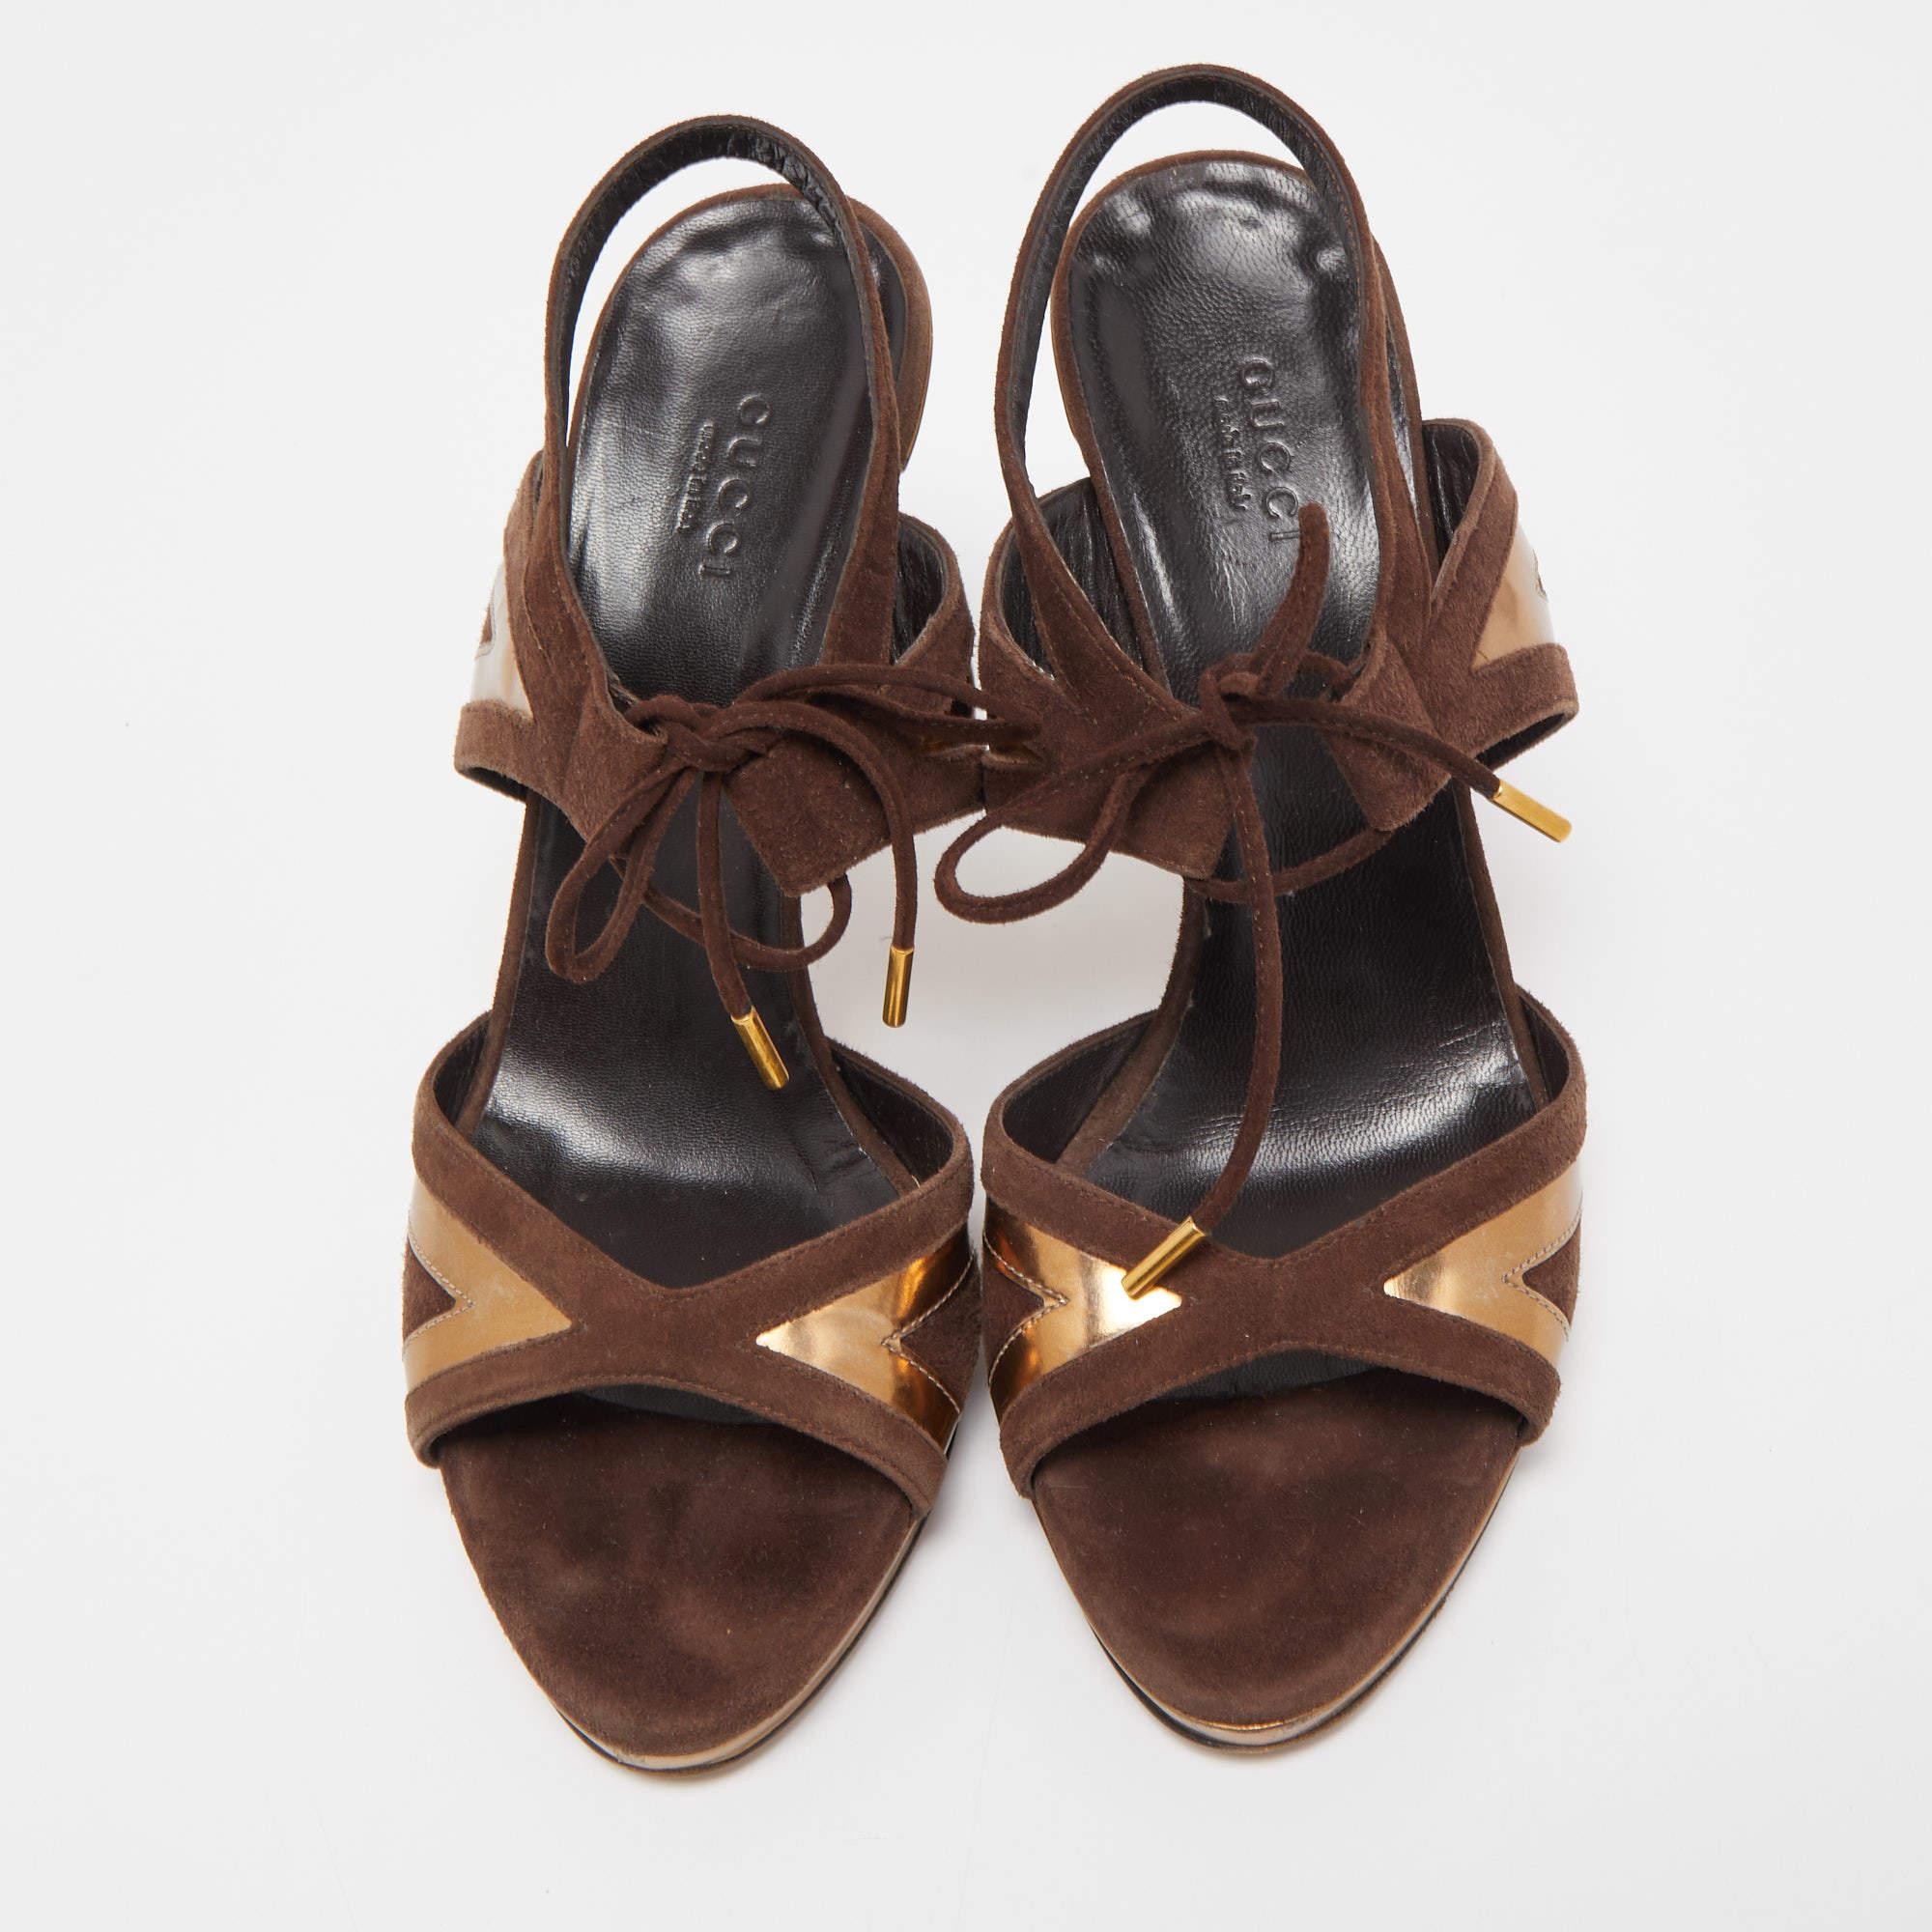 Gucci Brown/Gold Suede and Leather Ankle Tie Sandals Size 37.5 In Good Condition For Sale In Dubai, Al Qouz 2